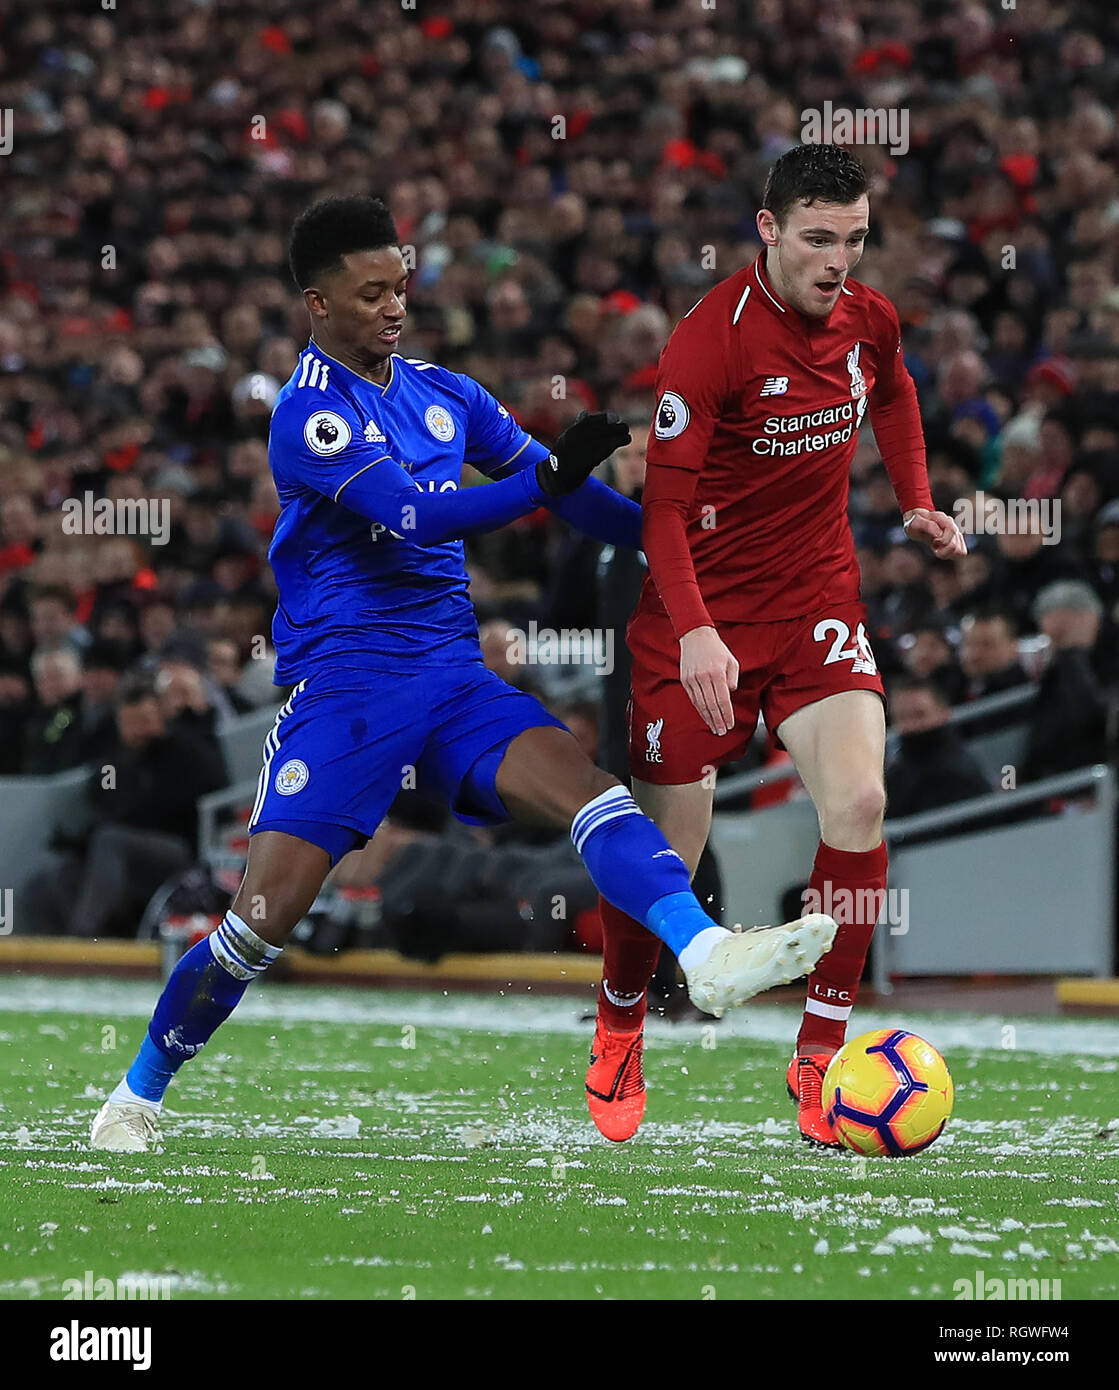 Leicester City's Demarai Gray and Liverpool's Andrew Robertson battle for the ball during the Premier League match at Anfield, Liverpool. Stock Photo